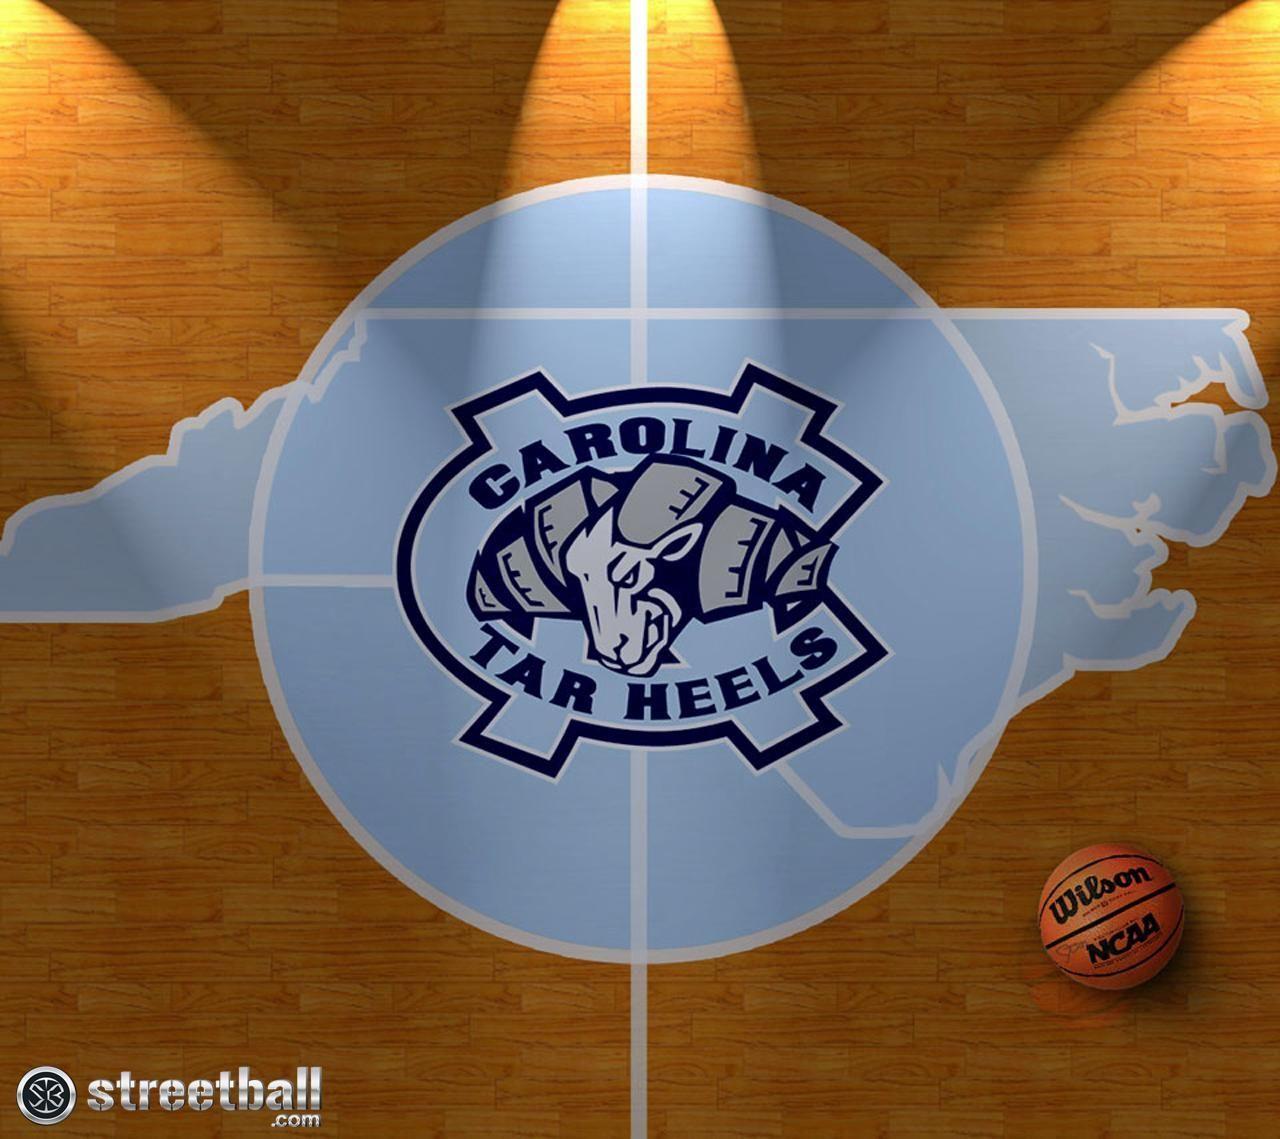 UNC Tar Heels Live Wallpaper Android Apps on Google Play 1920×1080